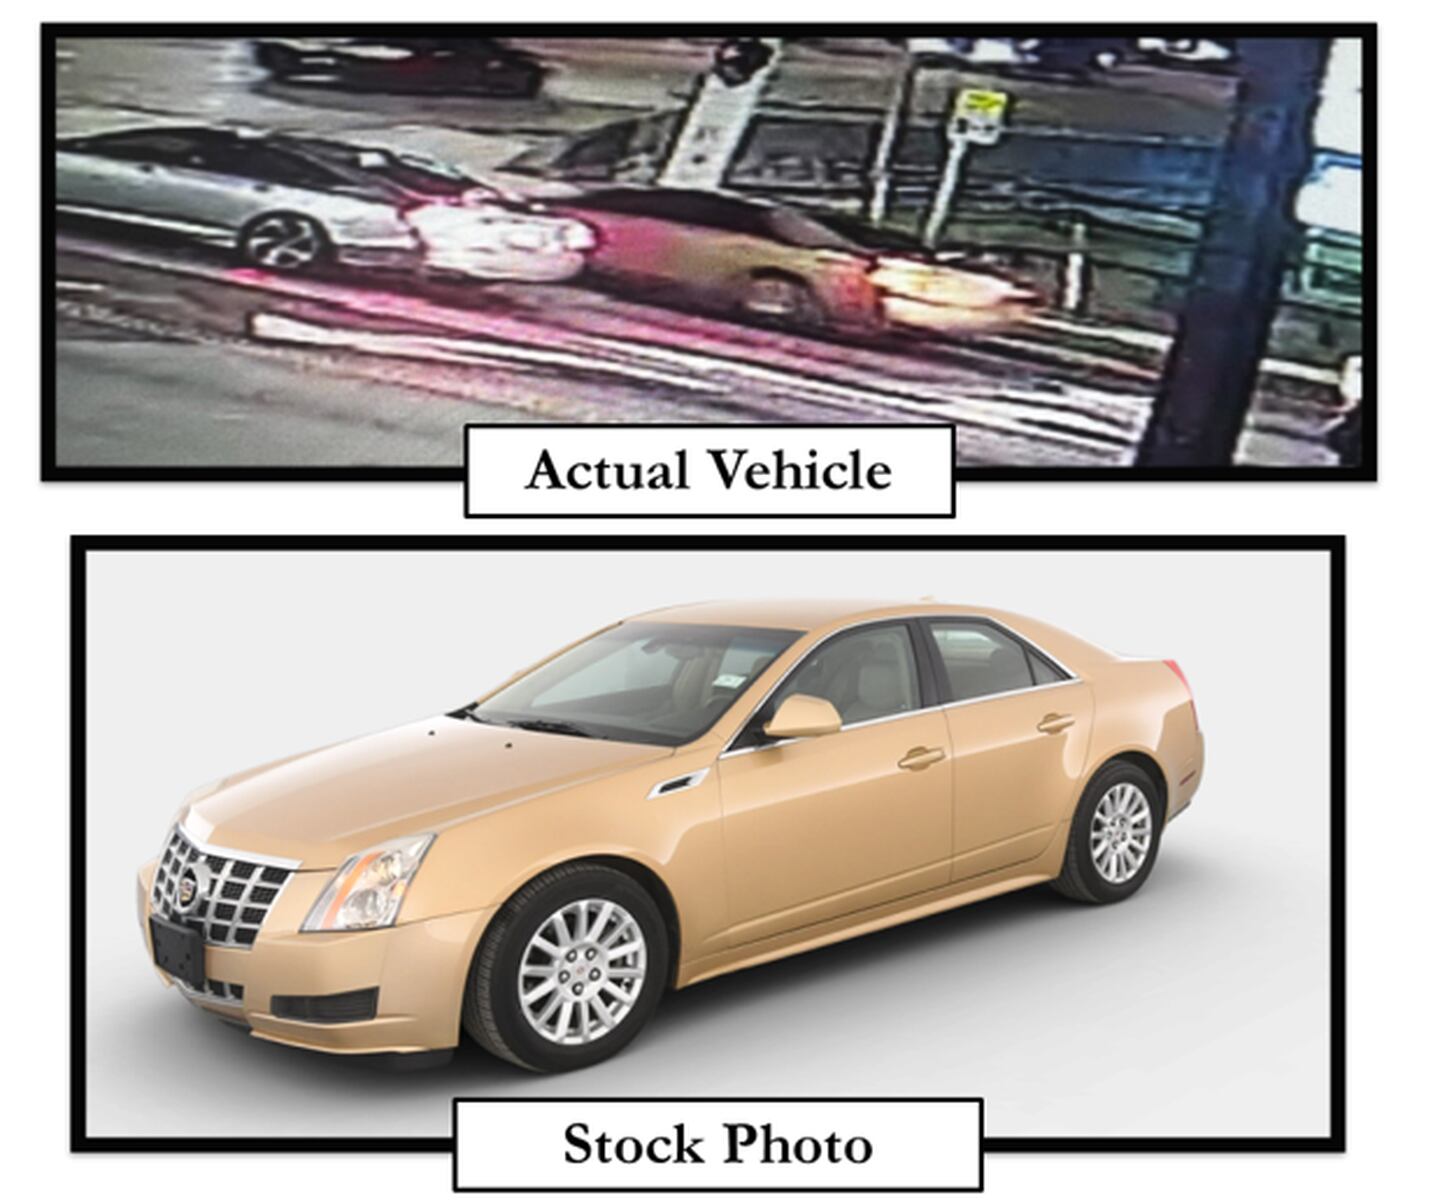 If you have information regarding this vehicle, please contact the Jacksonville Sheriff's Office at 904-630-0500.